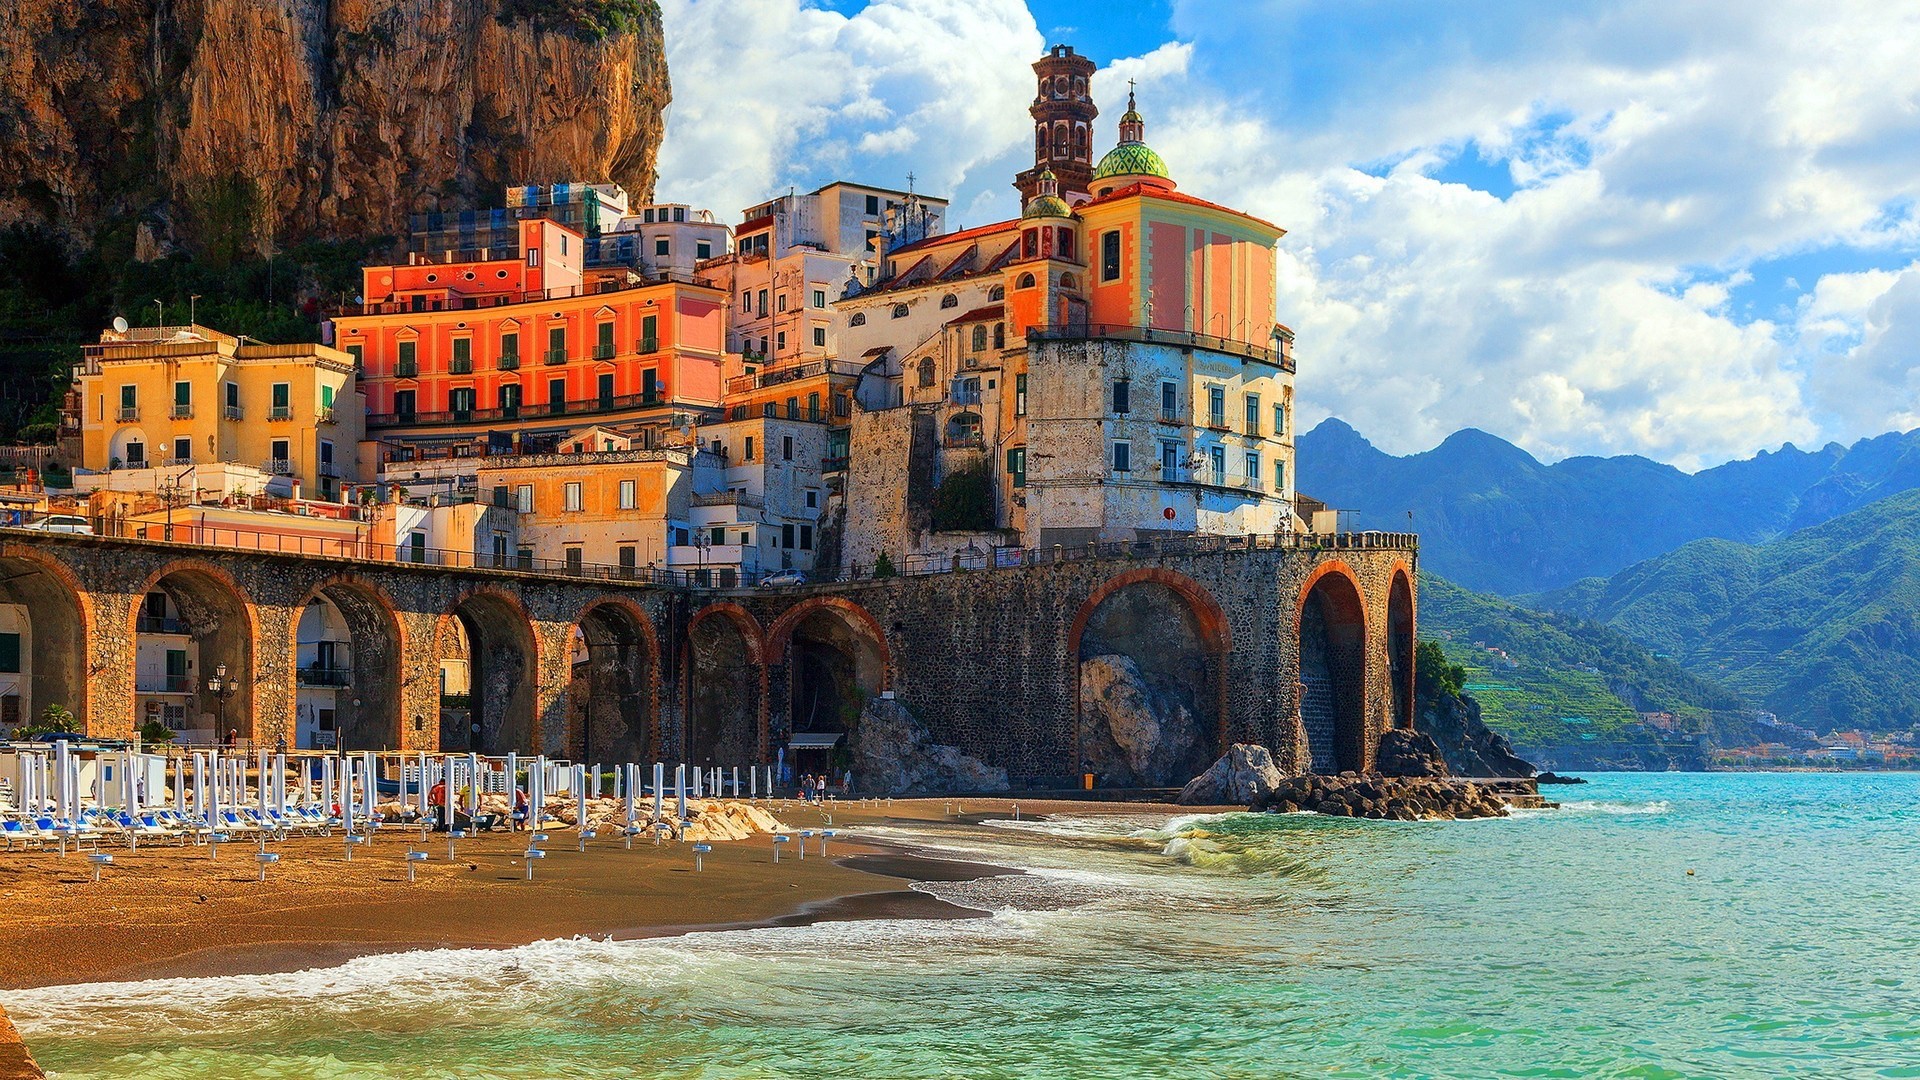 architecture, Building, House, Italy, Coast, Old building, Beach, Sand, Sea, Mountains, Arch, Bridge, Rock, Clouds, Tower Wallpaper